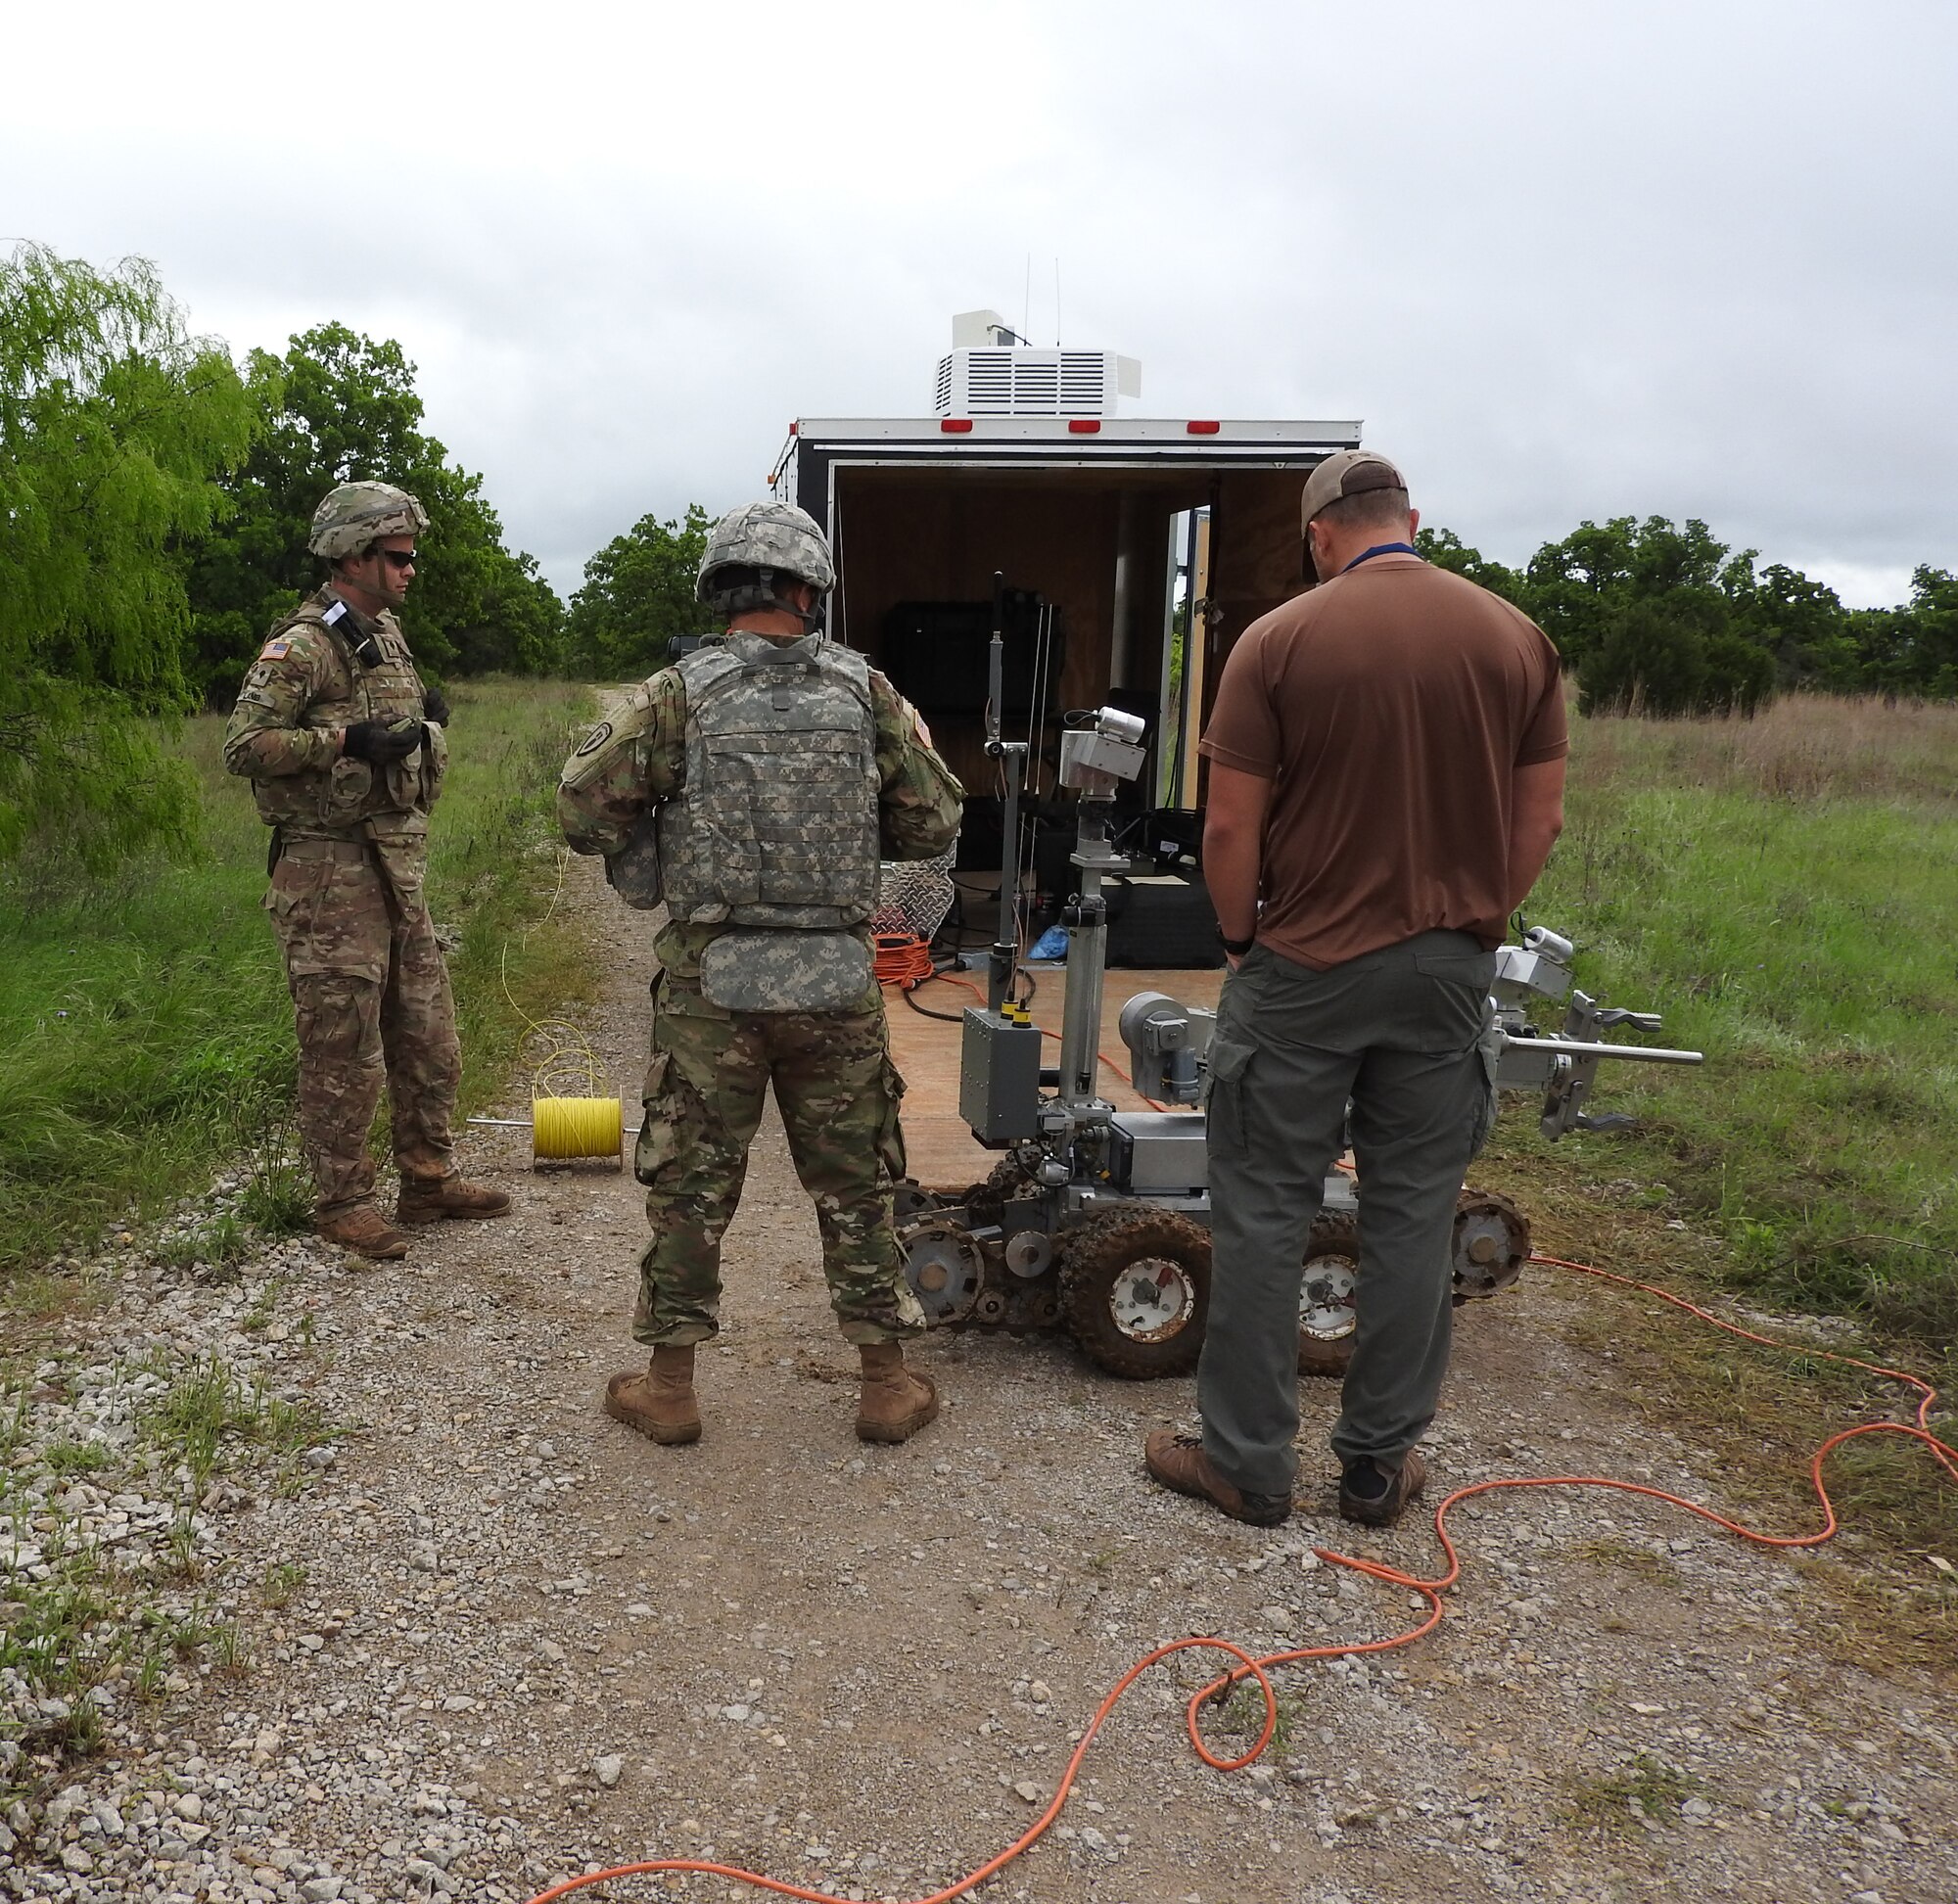 Raven’s Challenge X participants examine a robot during a scenario involving a downed unarmed vehicle with an incendiary explosive device at Fort Wolters, Texas, April 20, 2016.  (U.S. Air Force Photo/Steve Warns/Released)